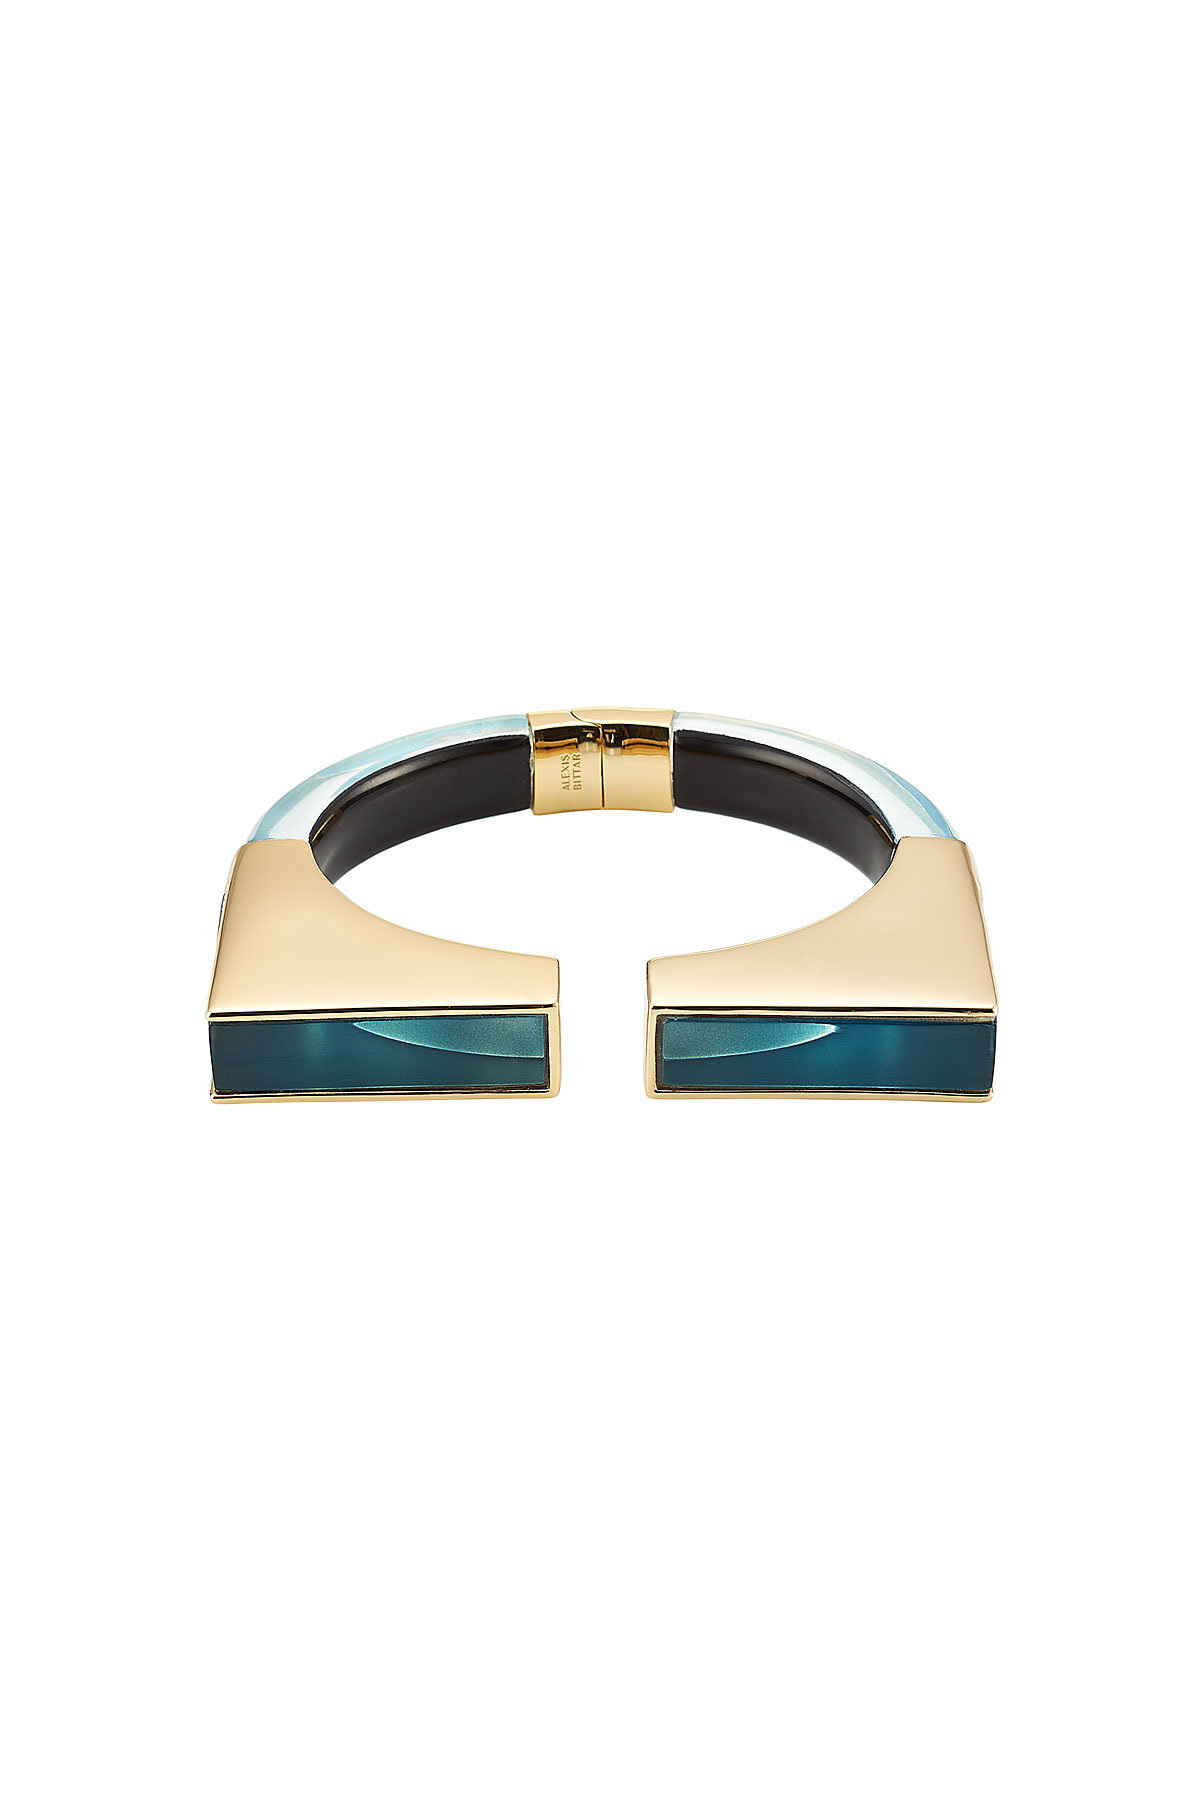 Gold-Plated Bracelet by Alexis Bittar